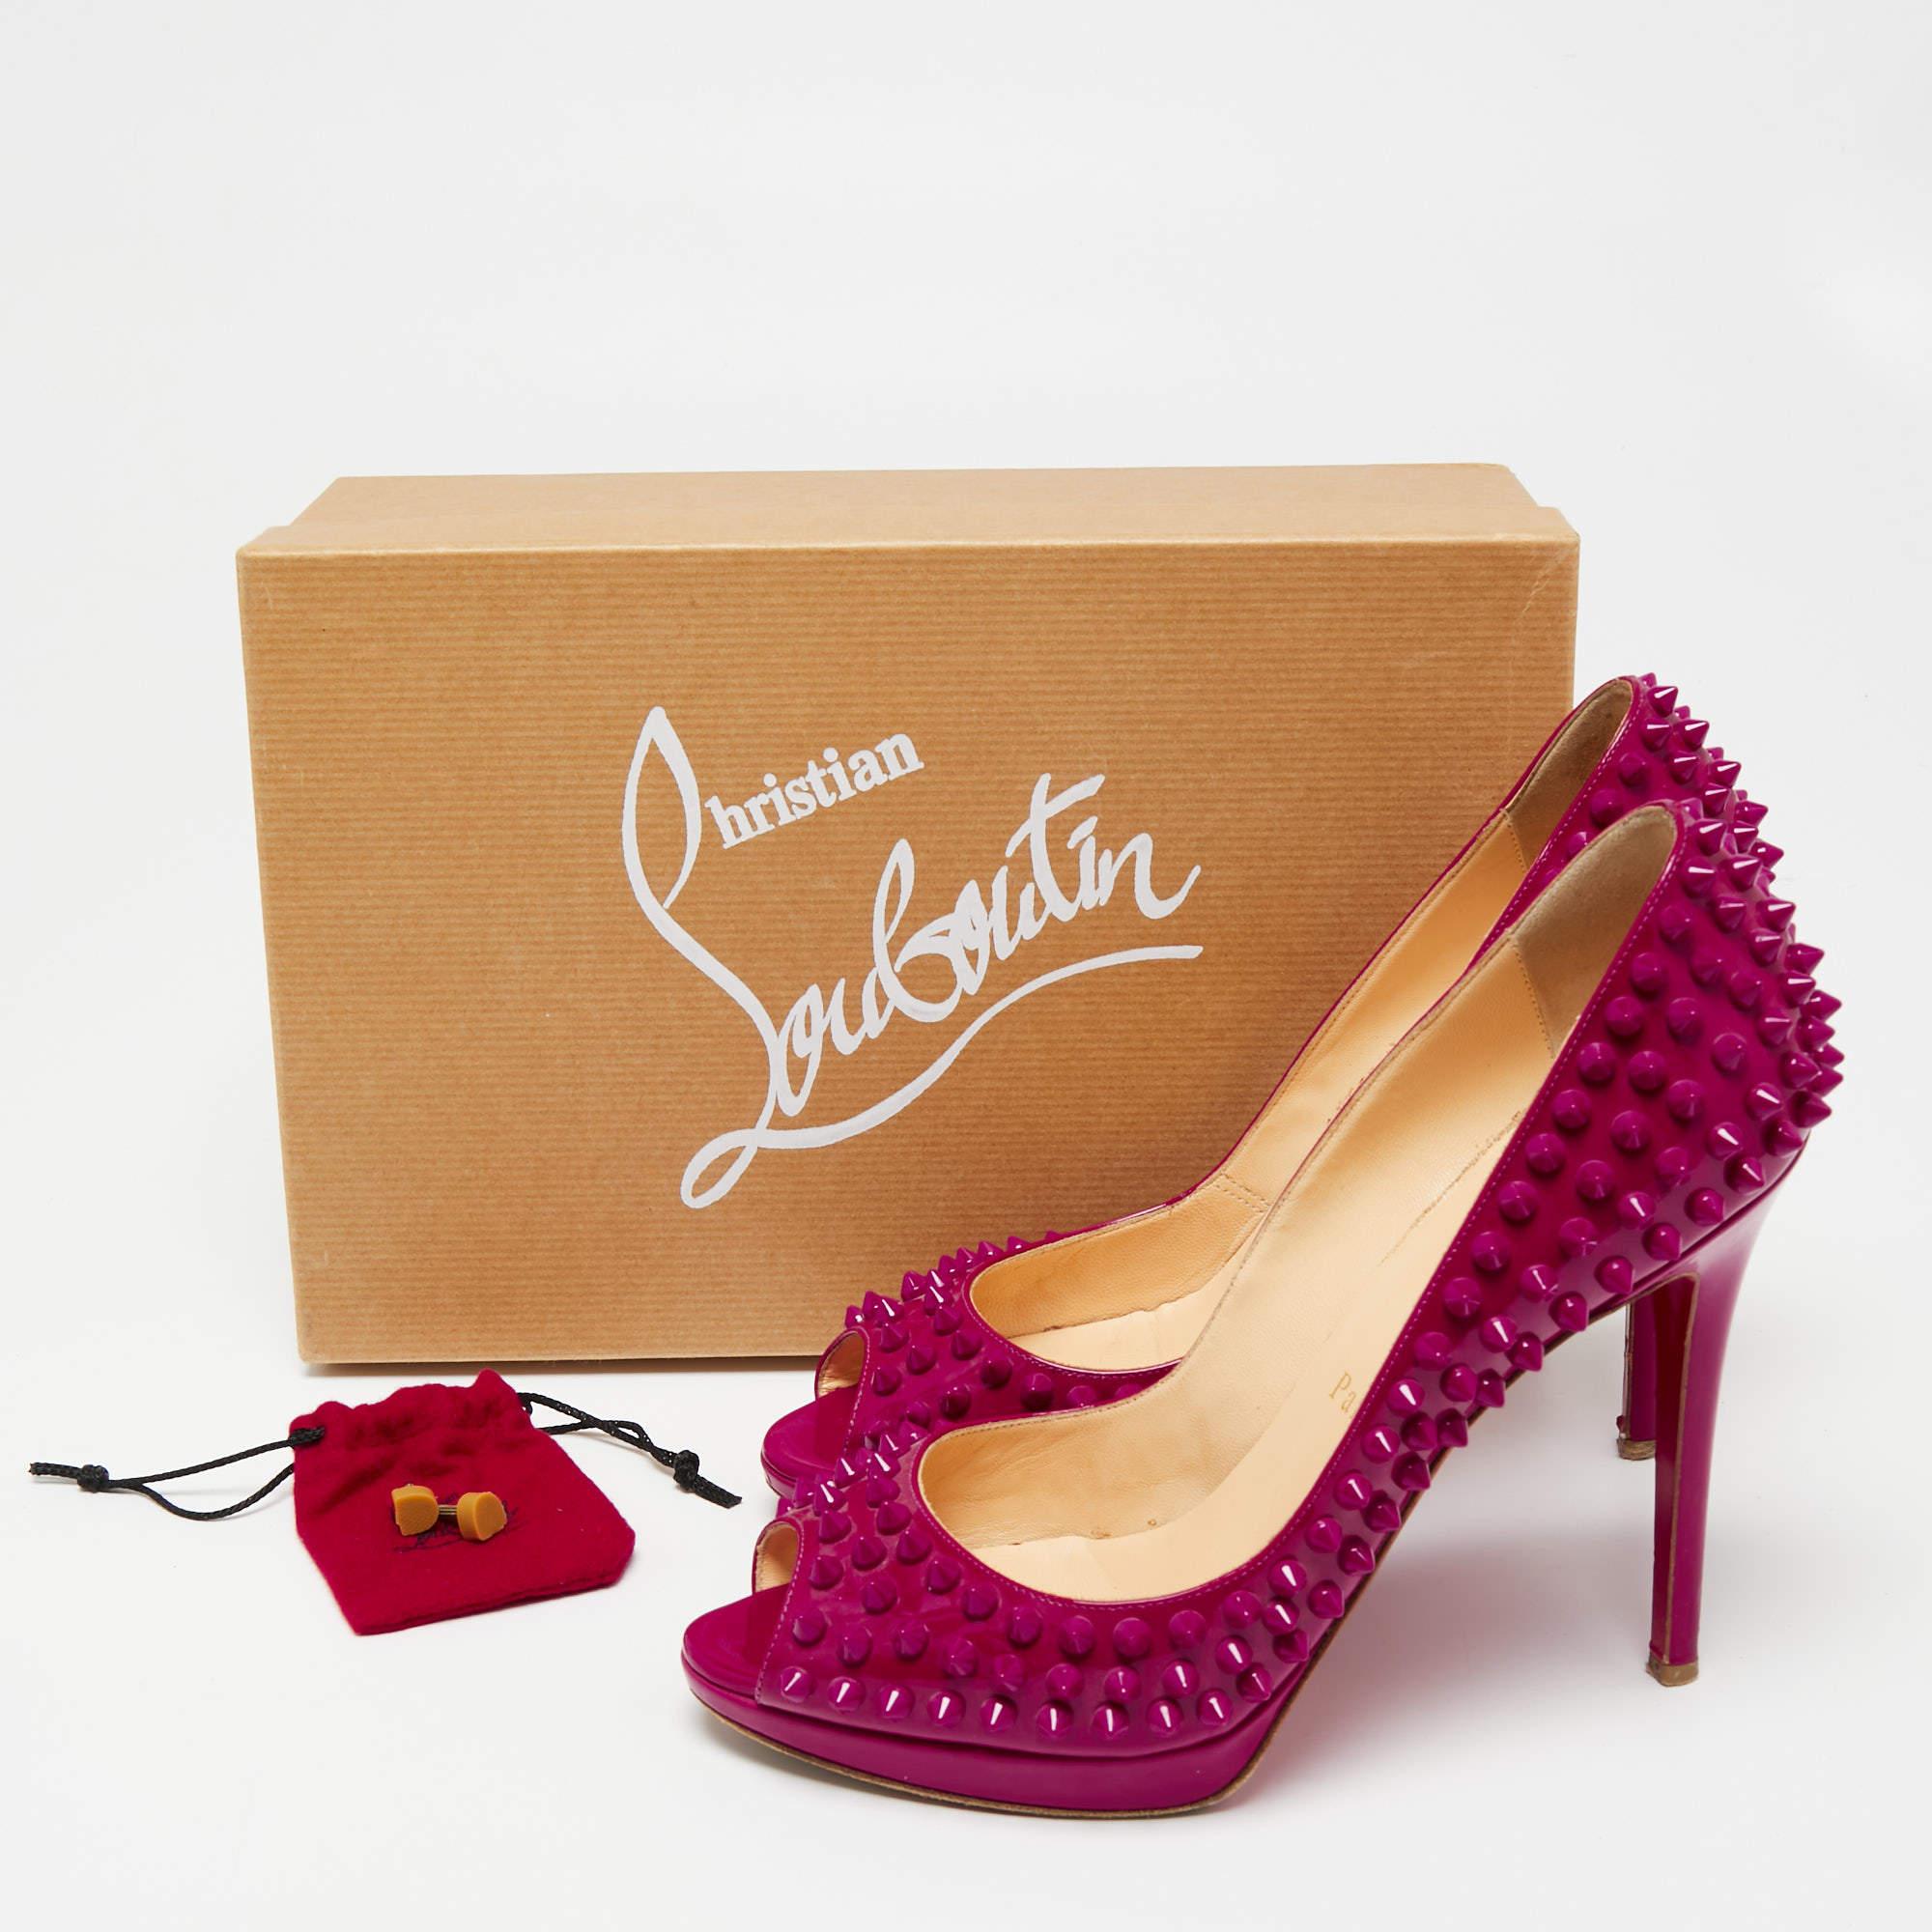 Christian Louboutin Hot Pink Patent Yolanda Spiked Peep-Toe Pumps Size 38.5 For Sale 2